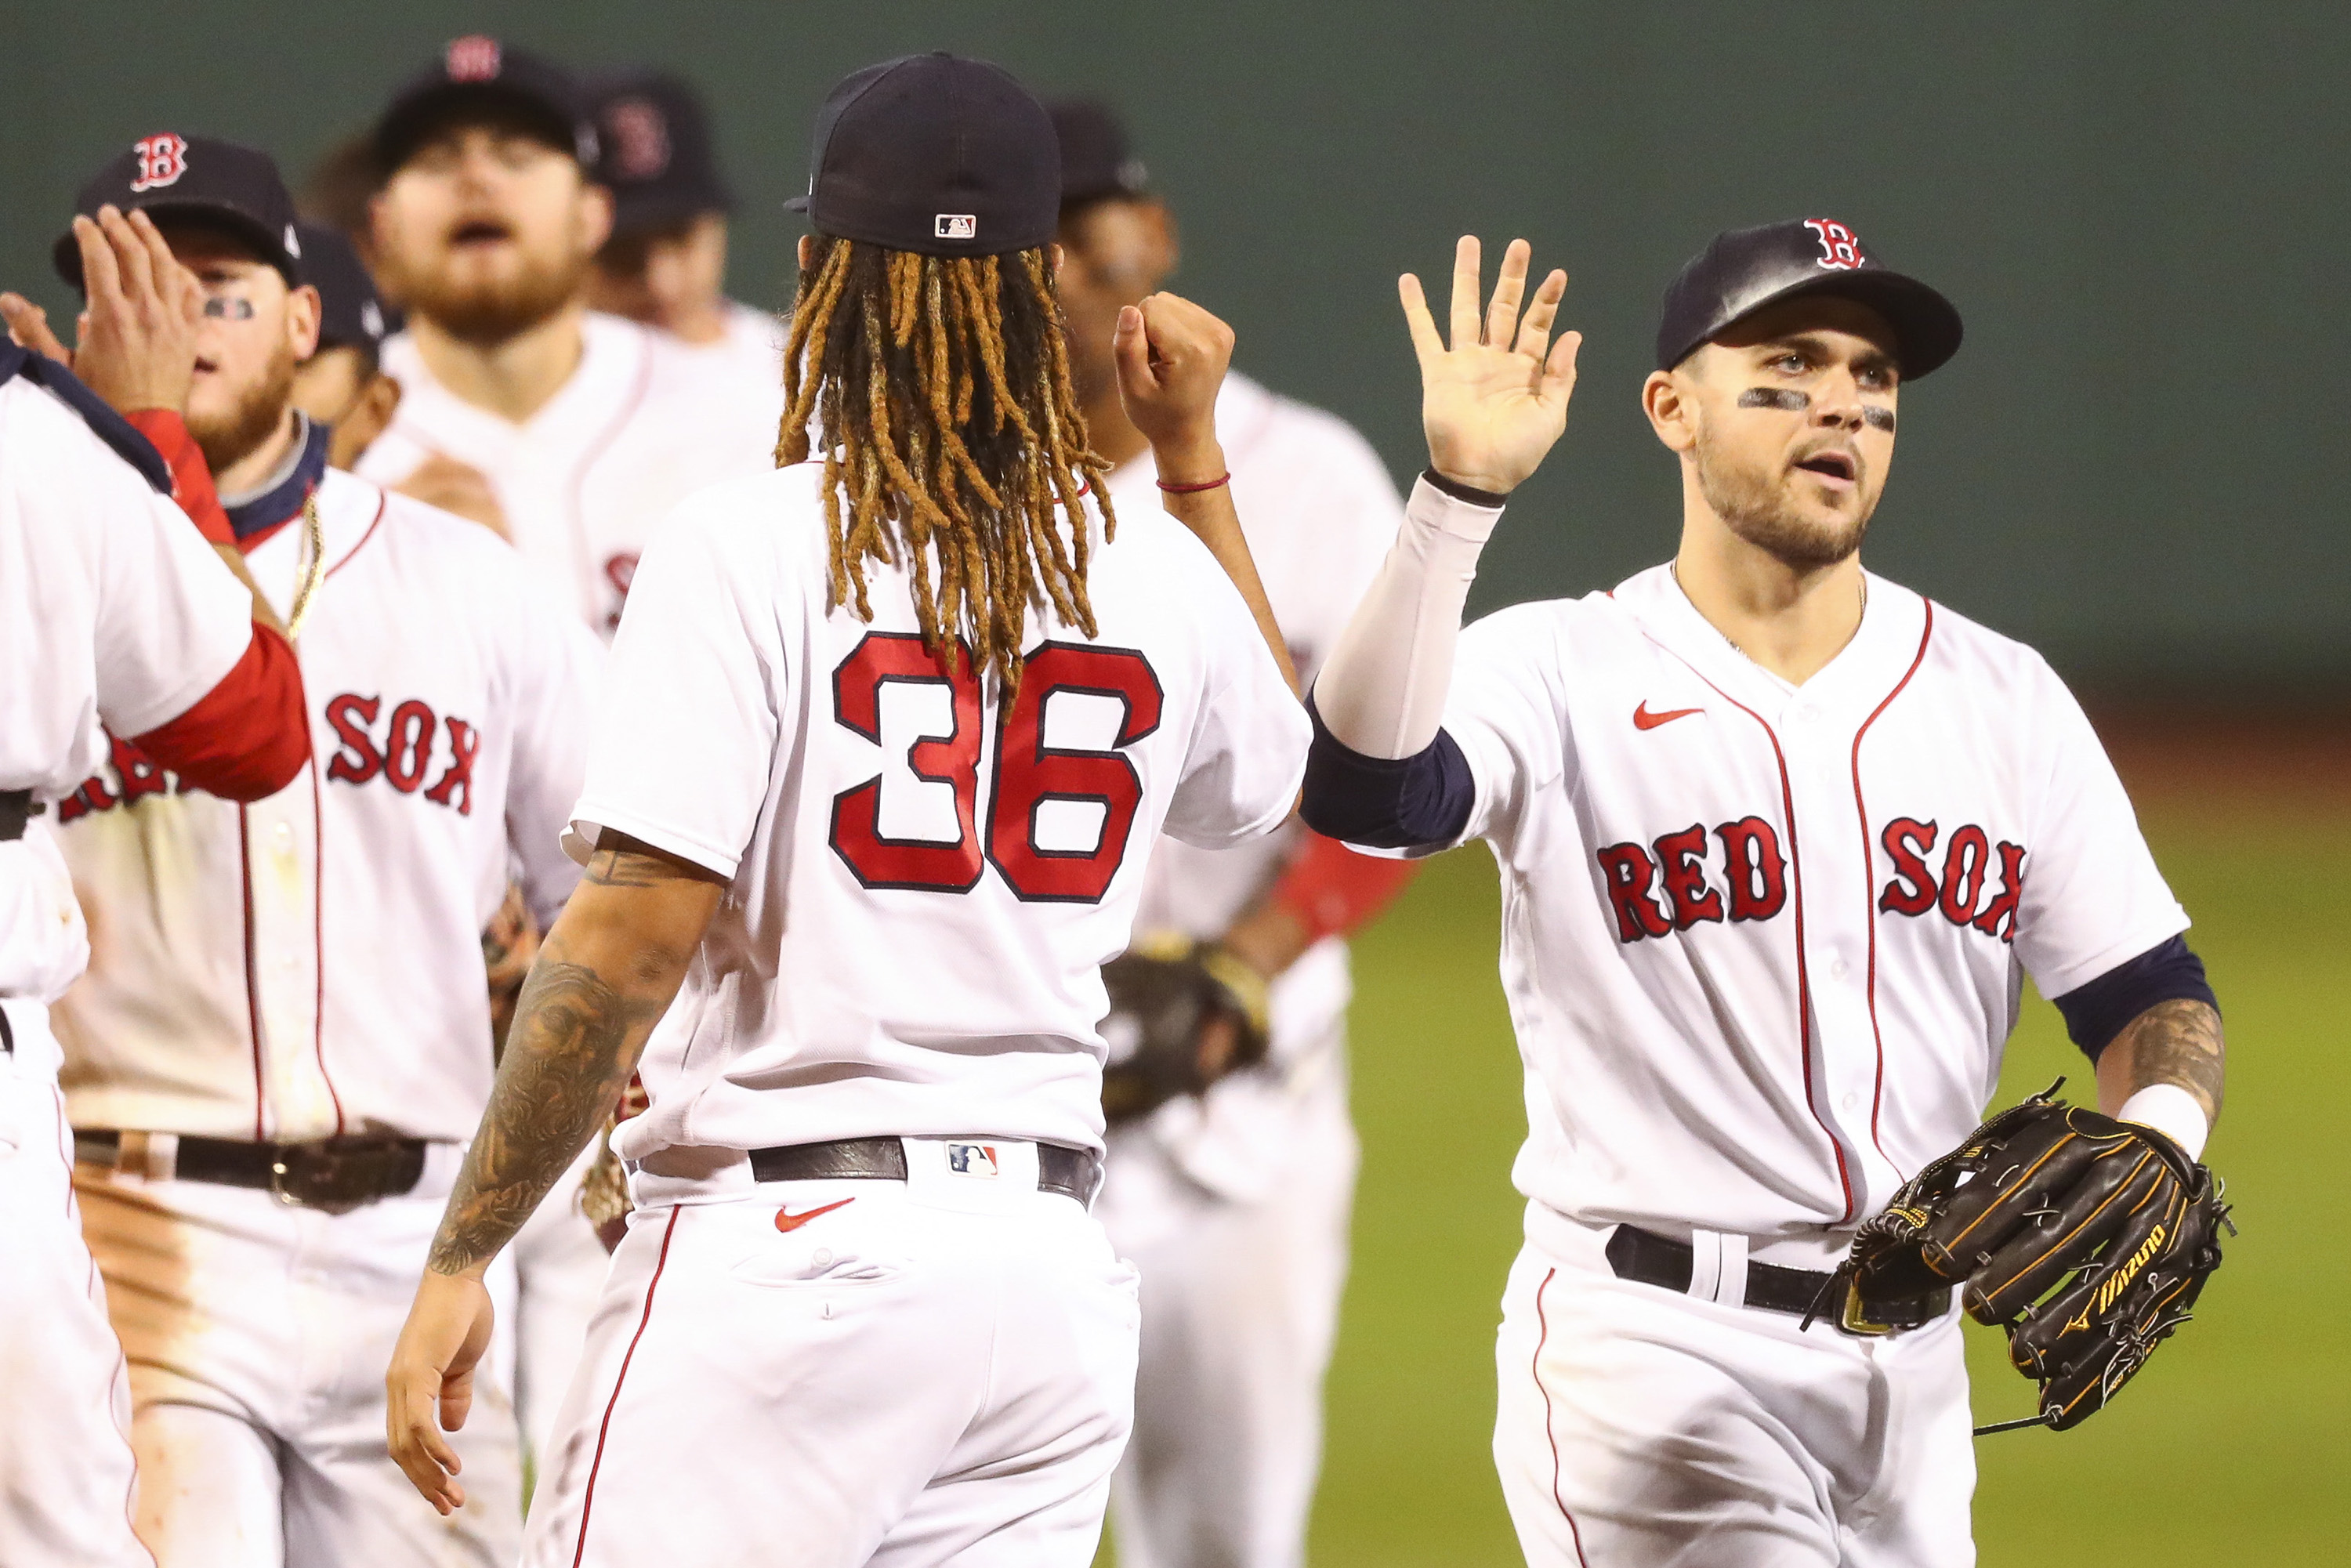 Red Sox Poised to Pay Most Per Win for Second Straight Season